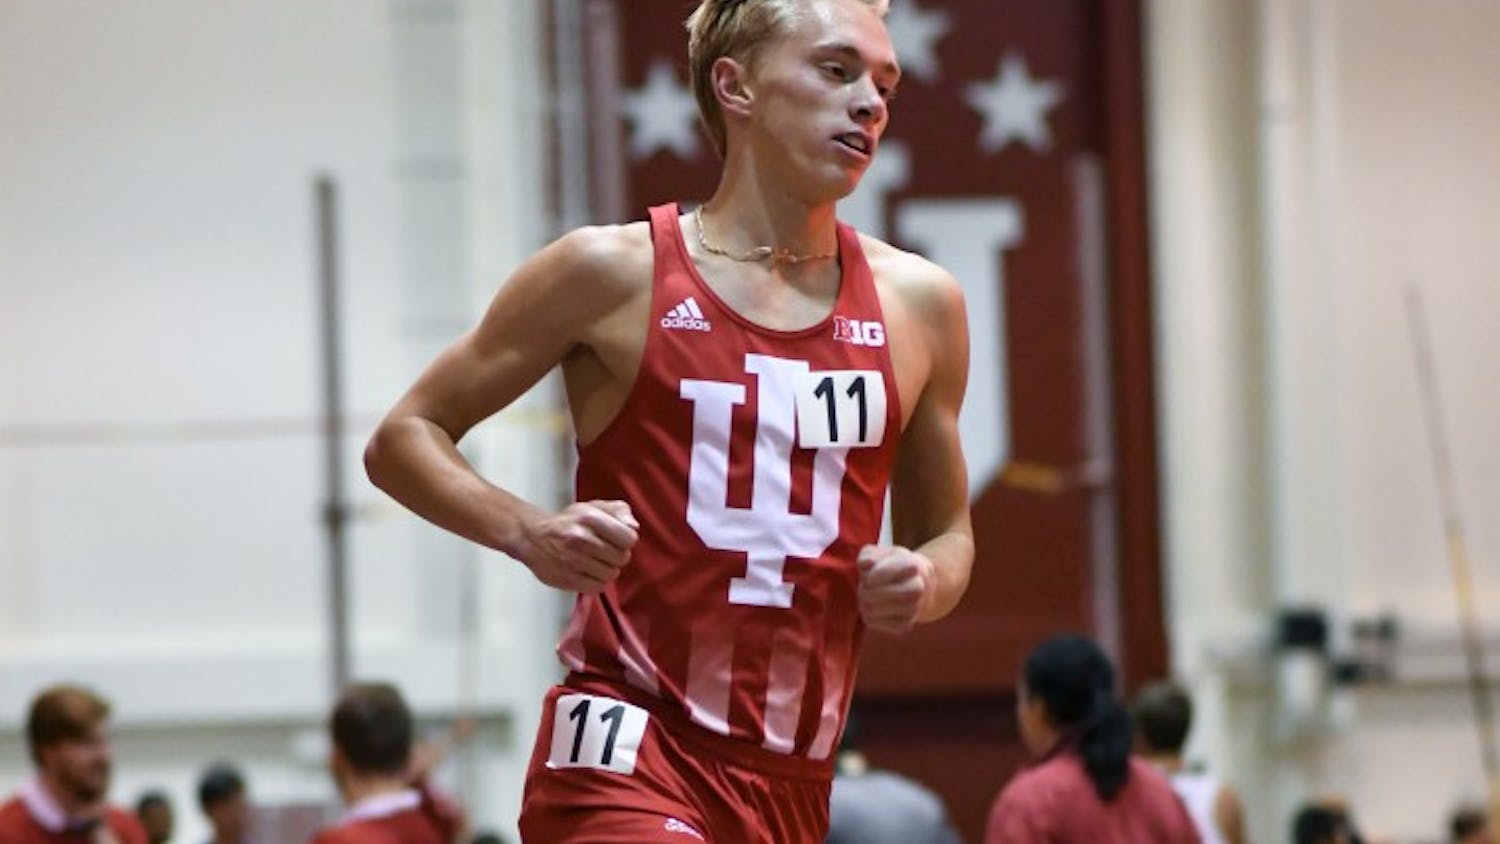 Redshirt freshman Ben Veatch races in the 3000 meters at the Gladstein Invitational. Veatch finished 16th in the men's 5,000-meter run at the NCAA Track and Field Outdoor Championships on Friday.&nbsp;